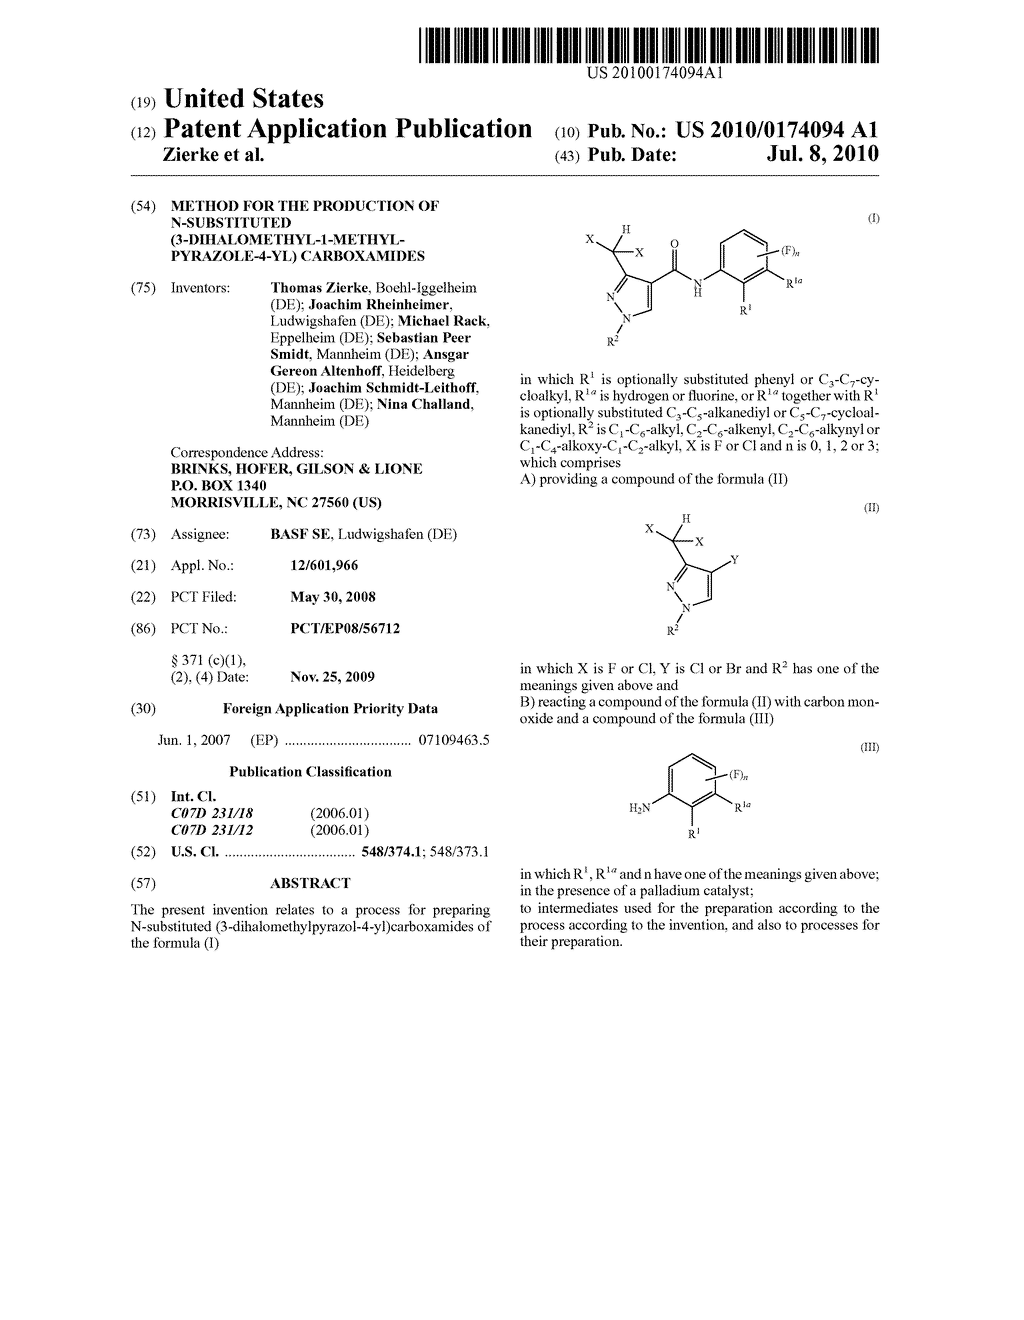 Method for the Production of N-Substituted (3-Dihalomethyl-1-Methyl-Pyrazole-4-yl) Carboxamides - diagram, schematic, and image 01